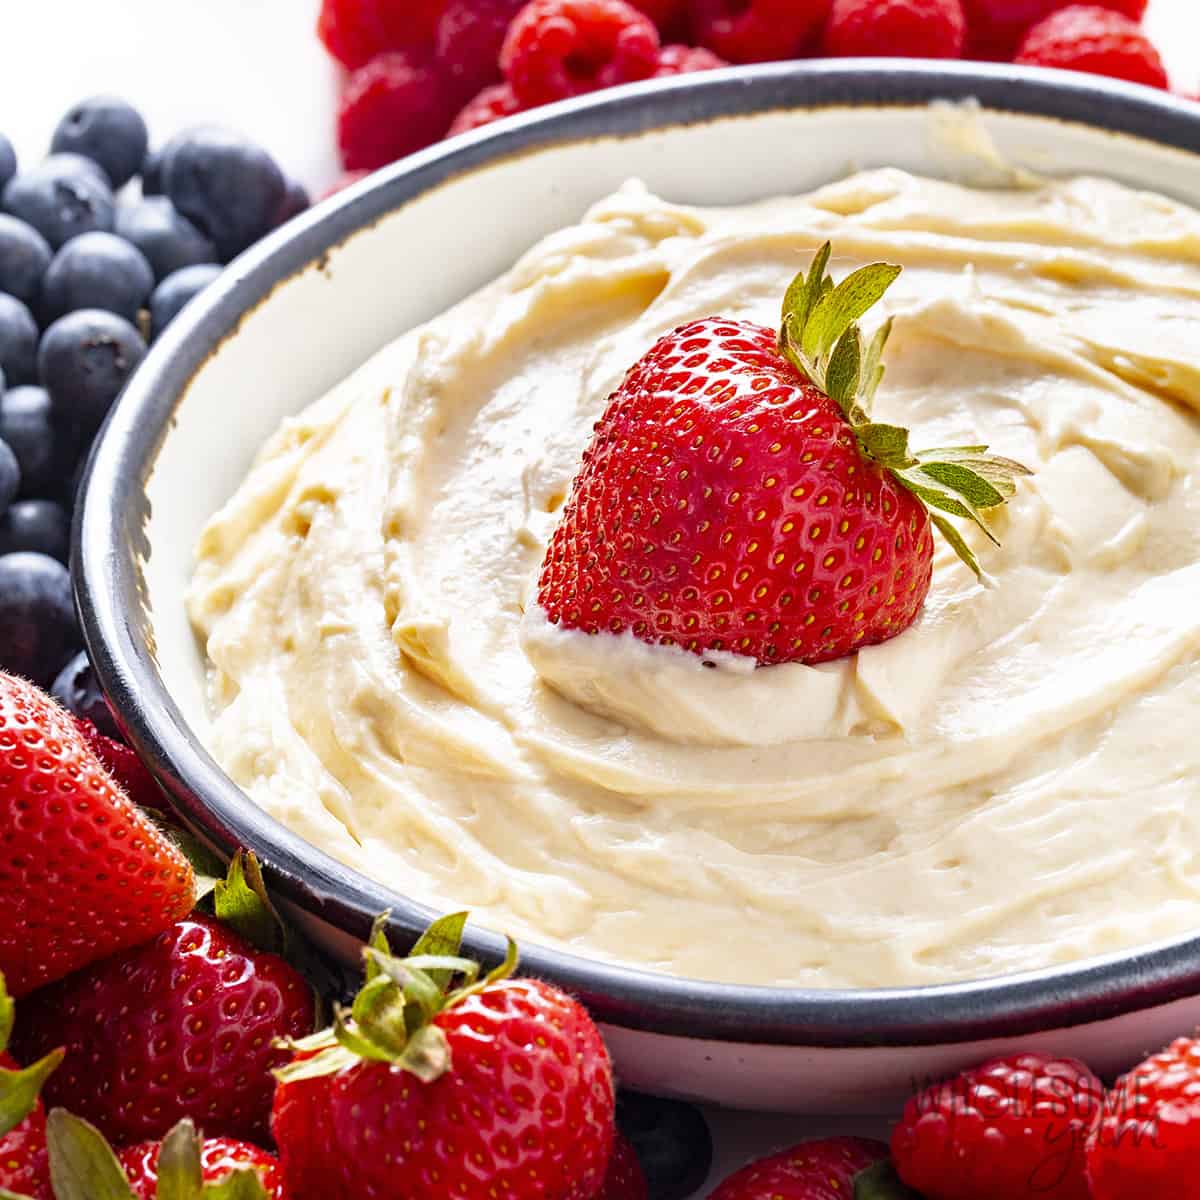 Close up of strawberry in healthy fruit dip next to berries.